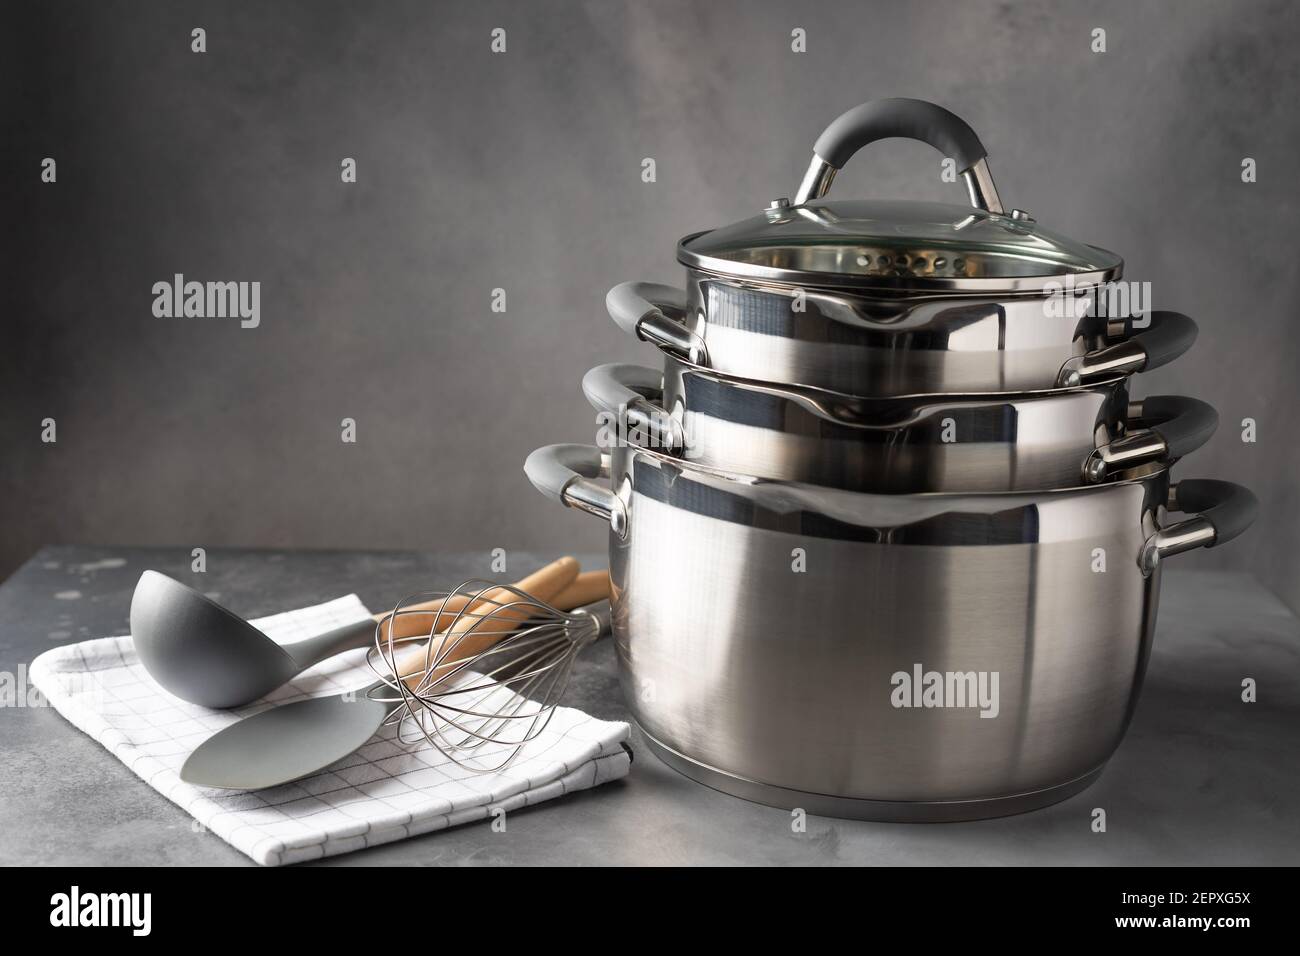 set of various cookware and utensils on dark background Stock Photo